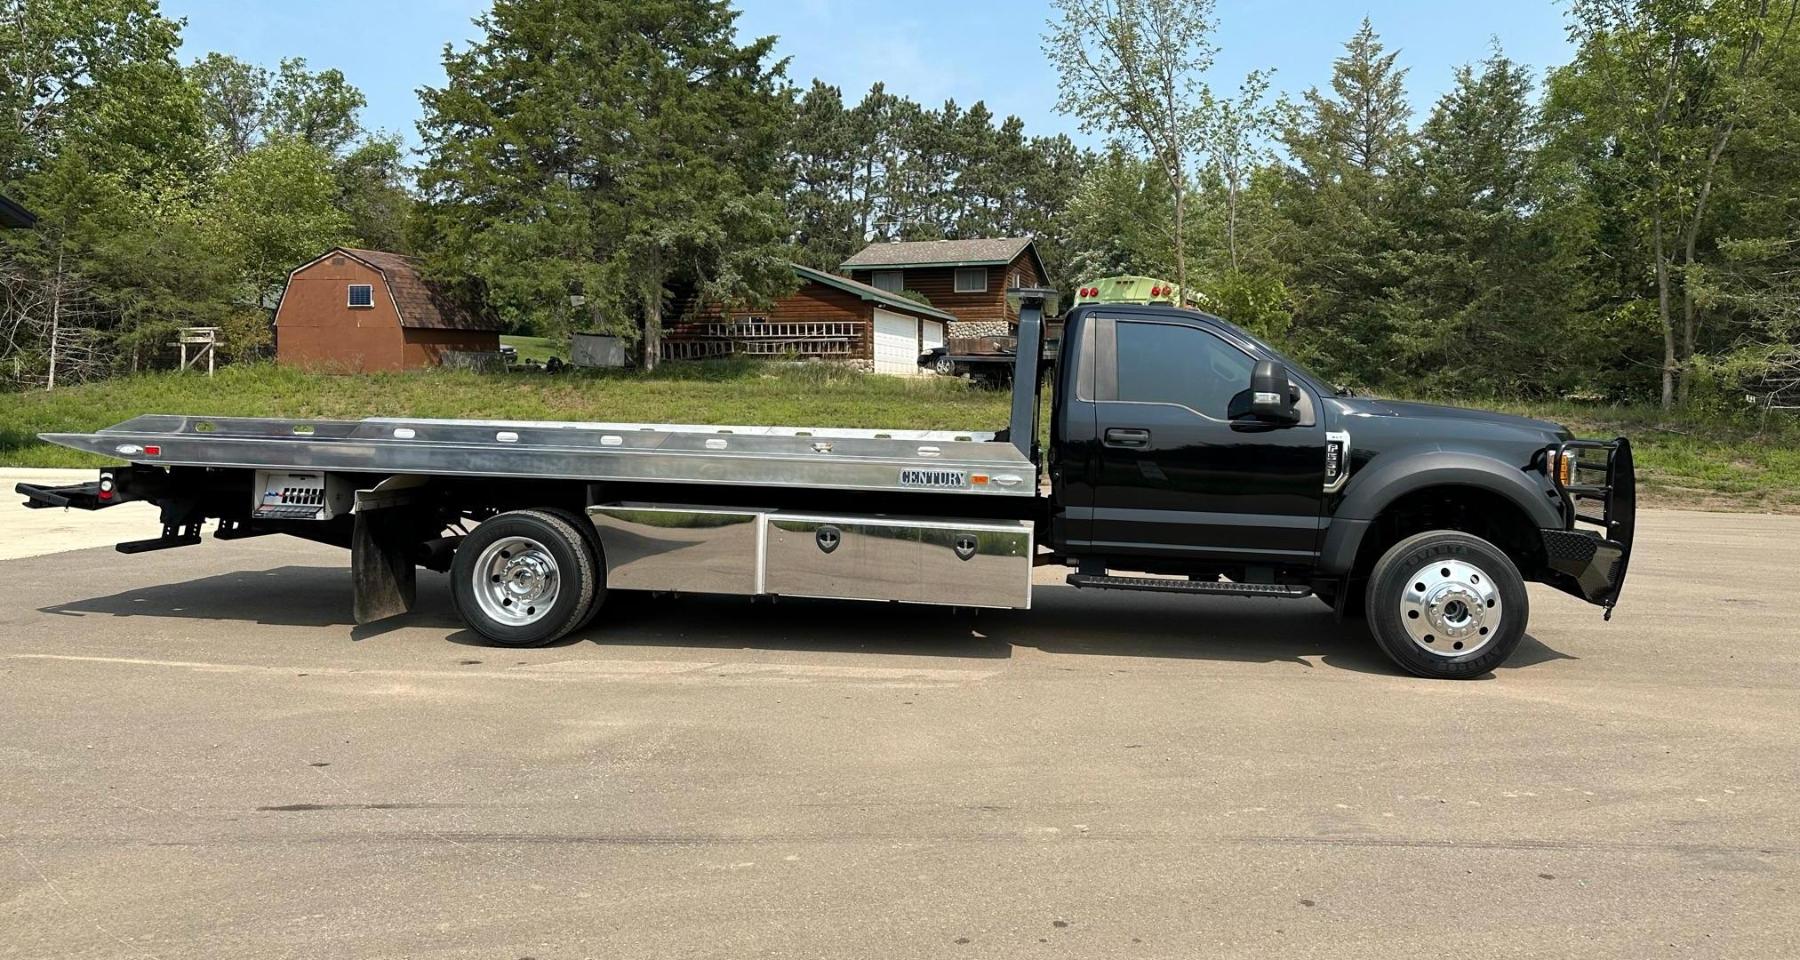 2017 Ford F-550 XLT With Century Aluminum Rollback Aut-Grip Wheel Lift